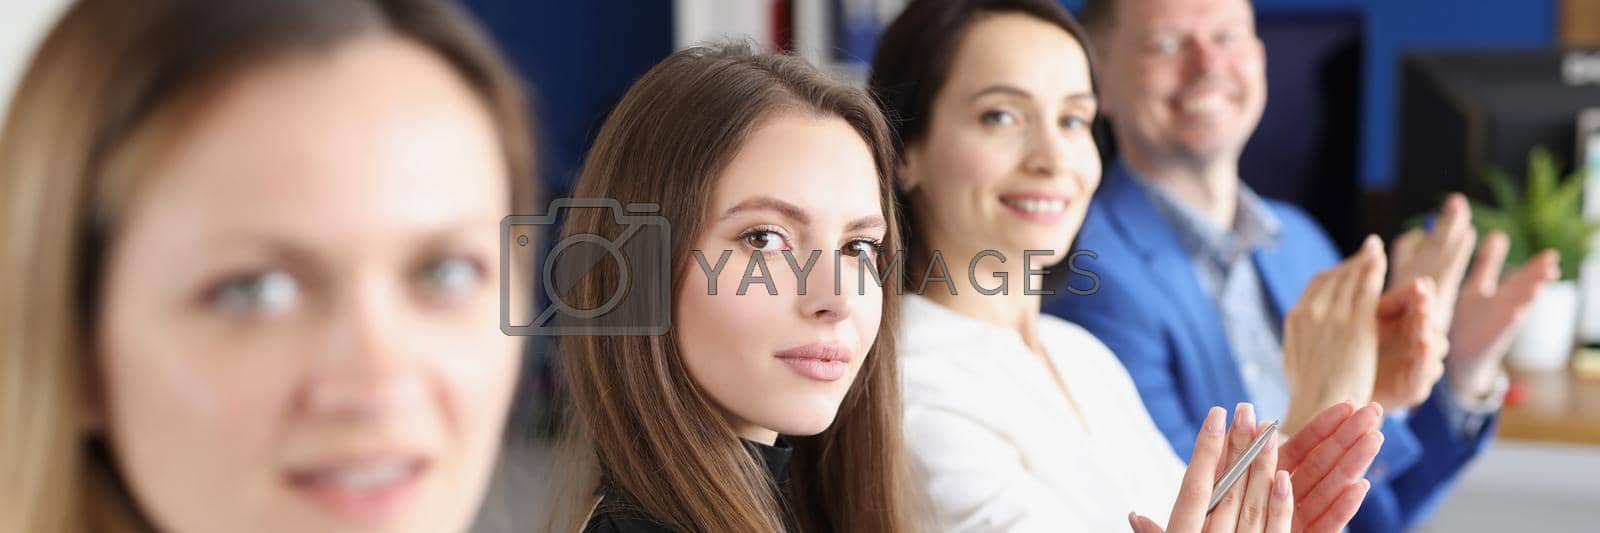 Royalty free image of Workers in presentable suits sit in room by kuprevich